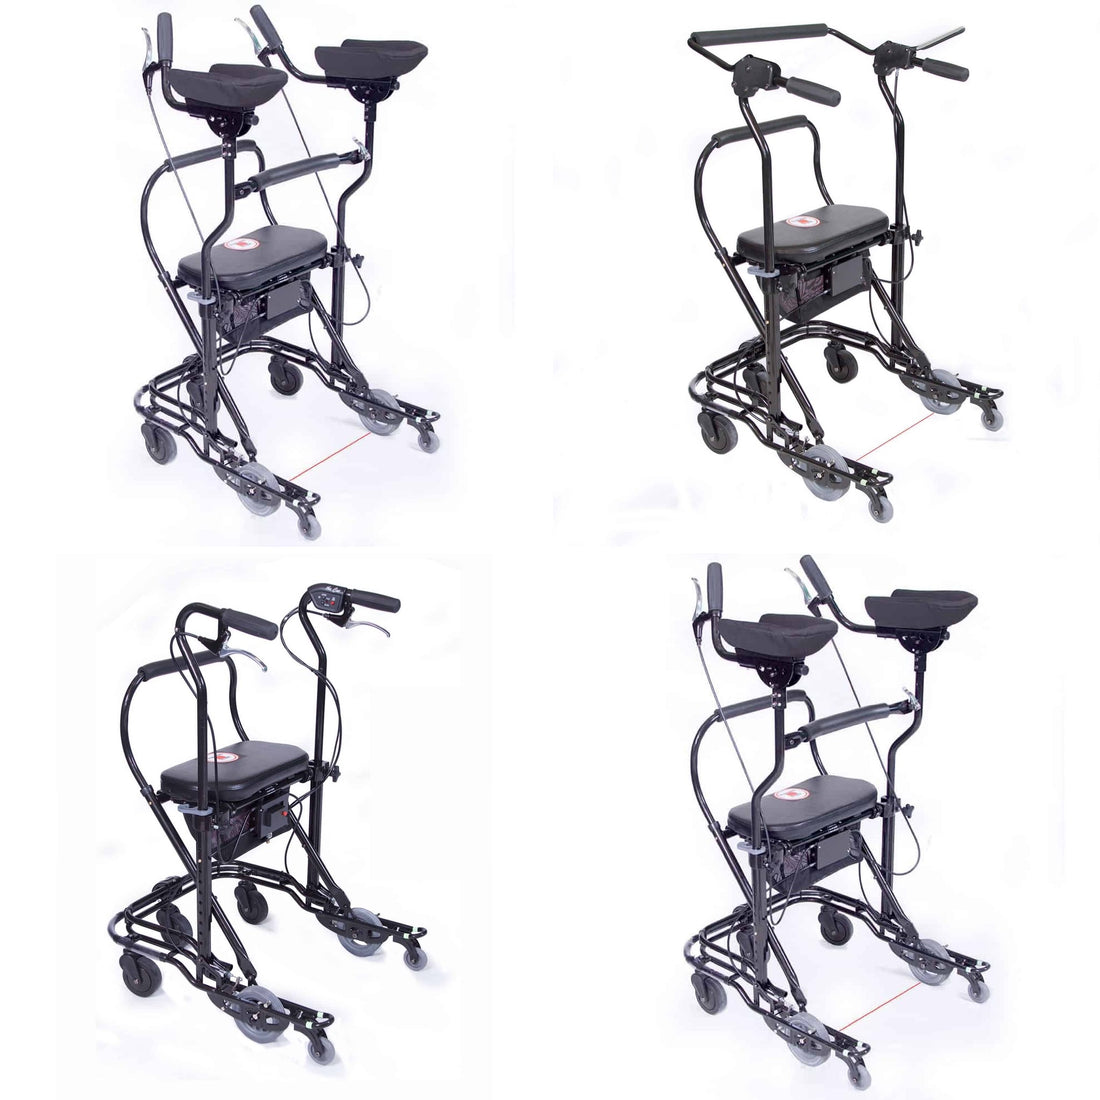 Enhancing Mobility and Independence: The U-Step Walker for PSP Patients